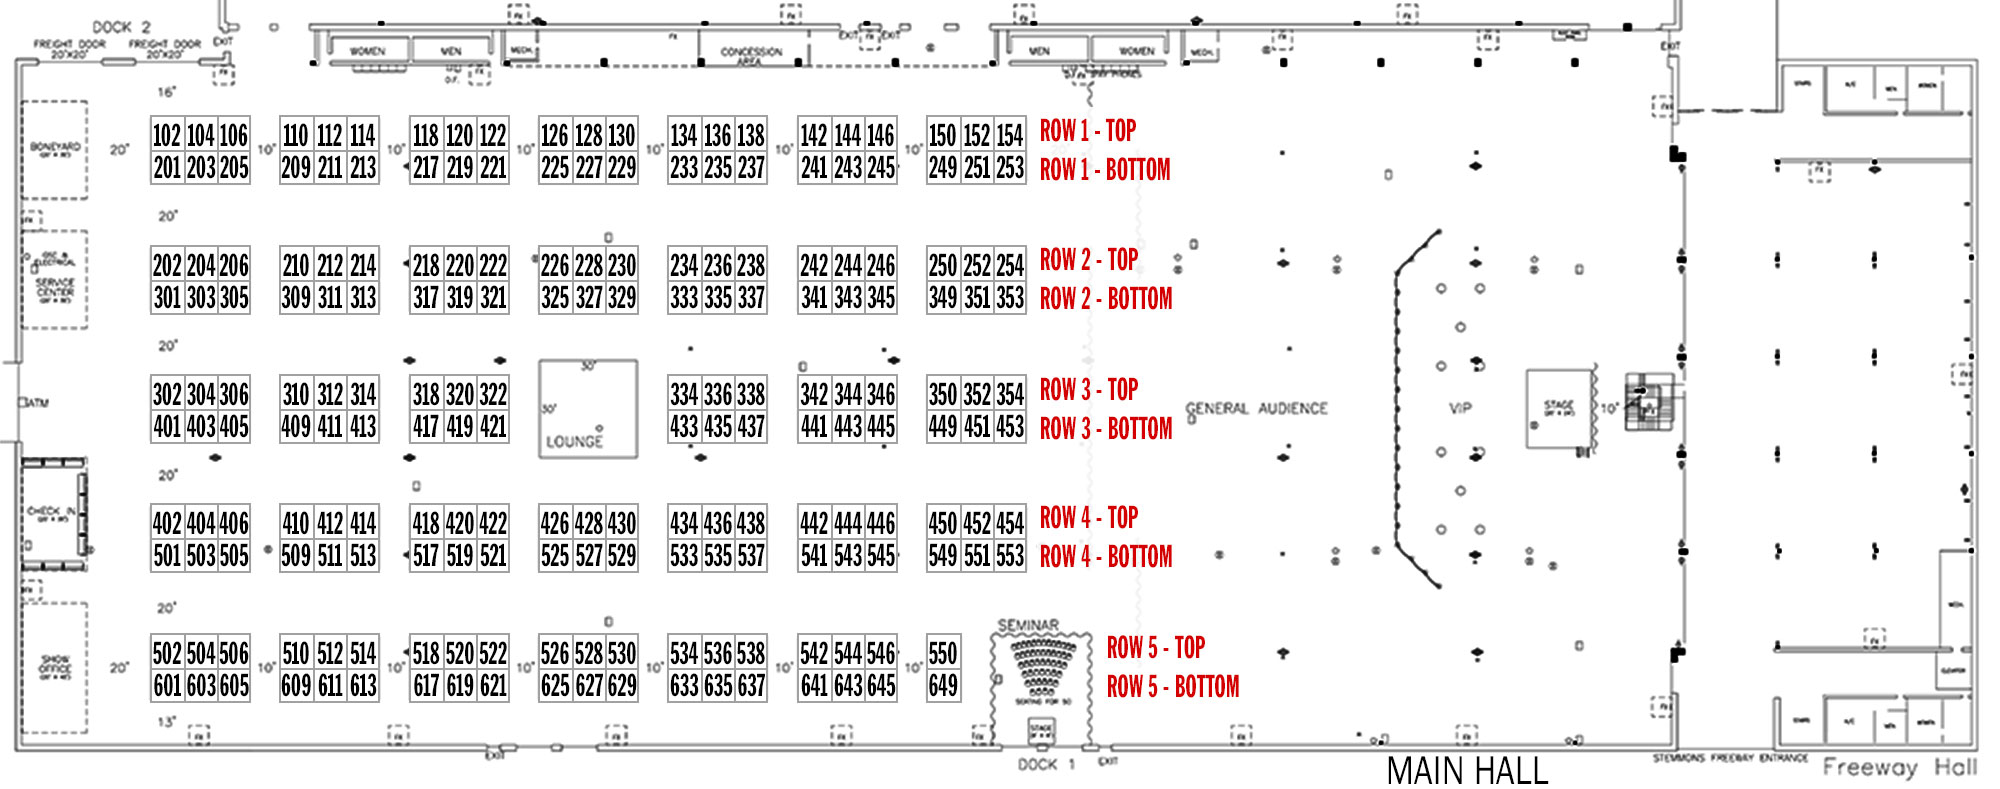 Main Floor Layout use to order booths - rows labeled